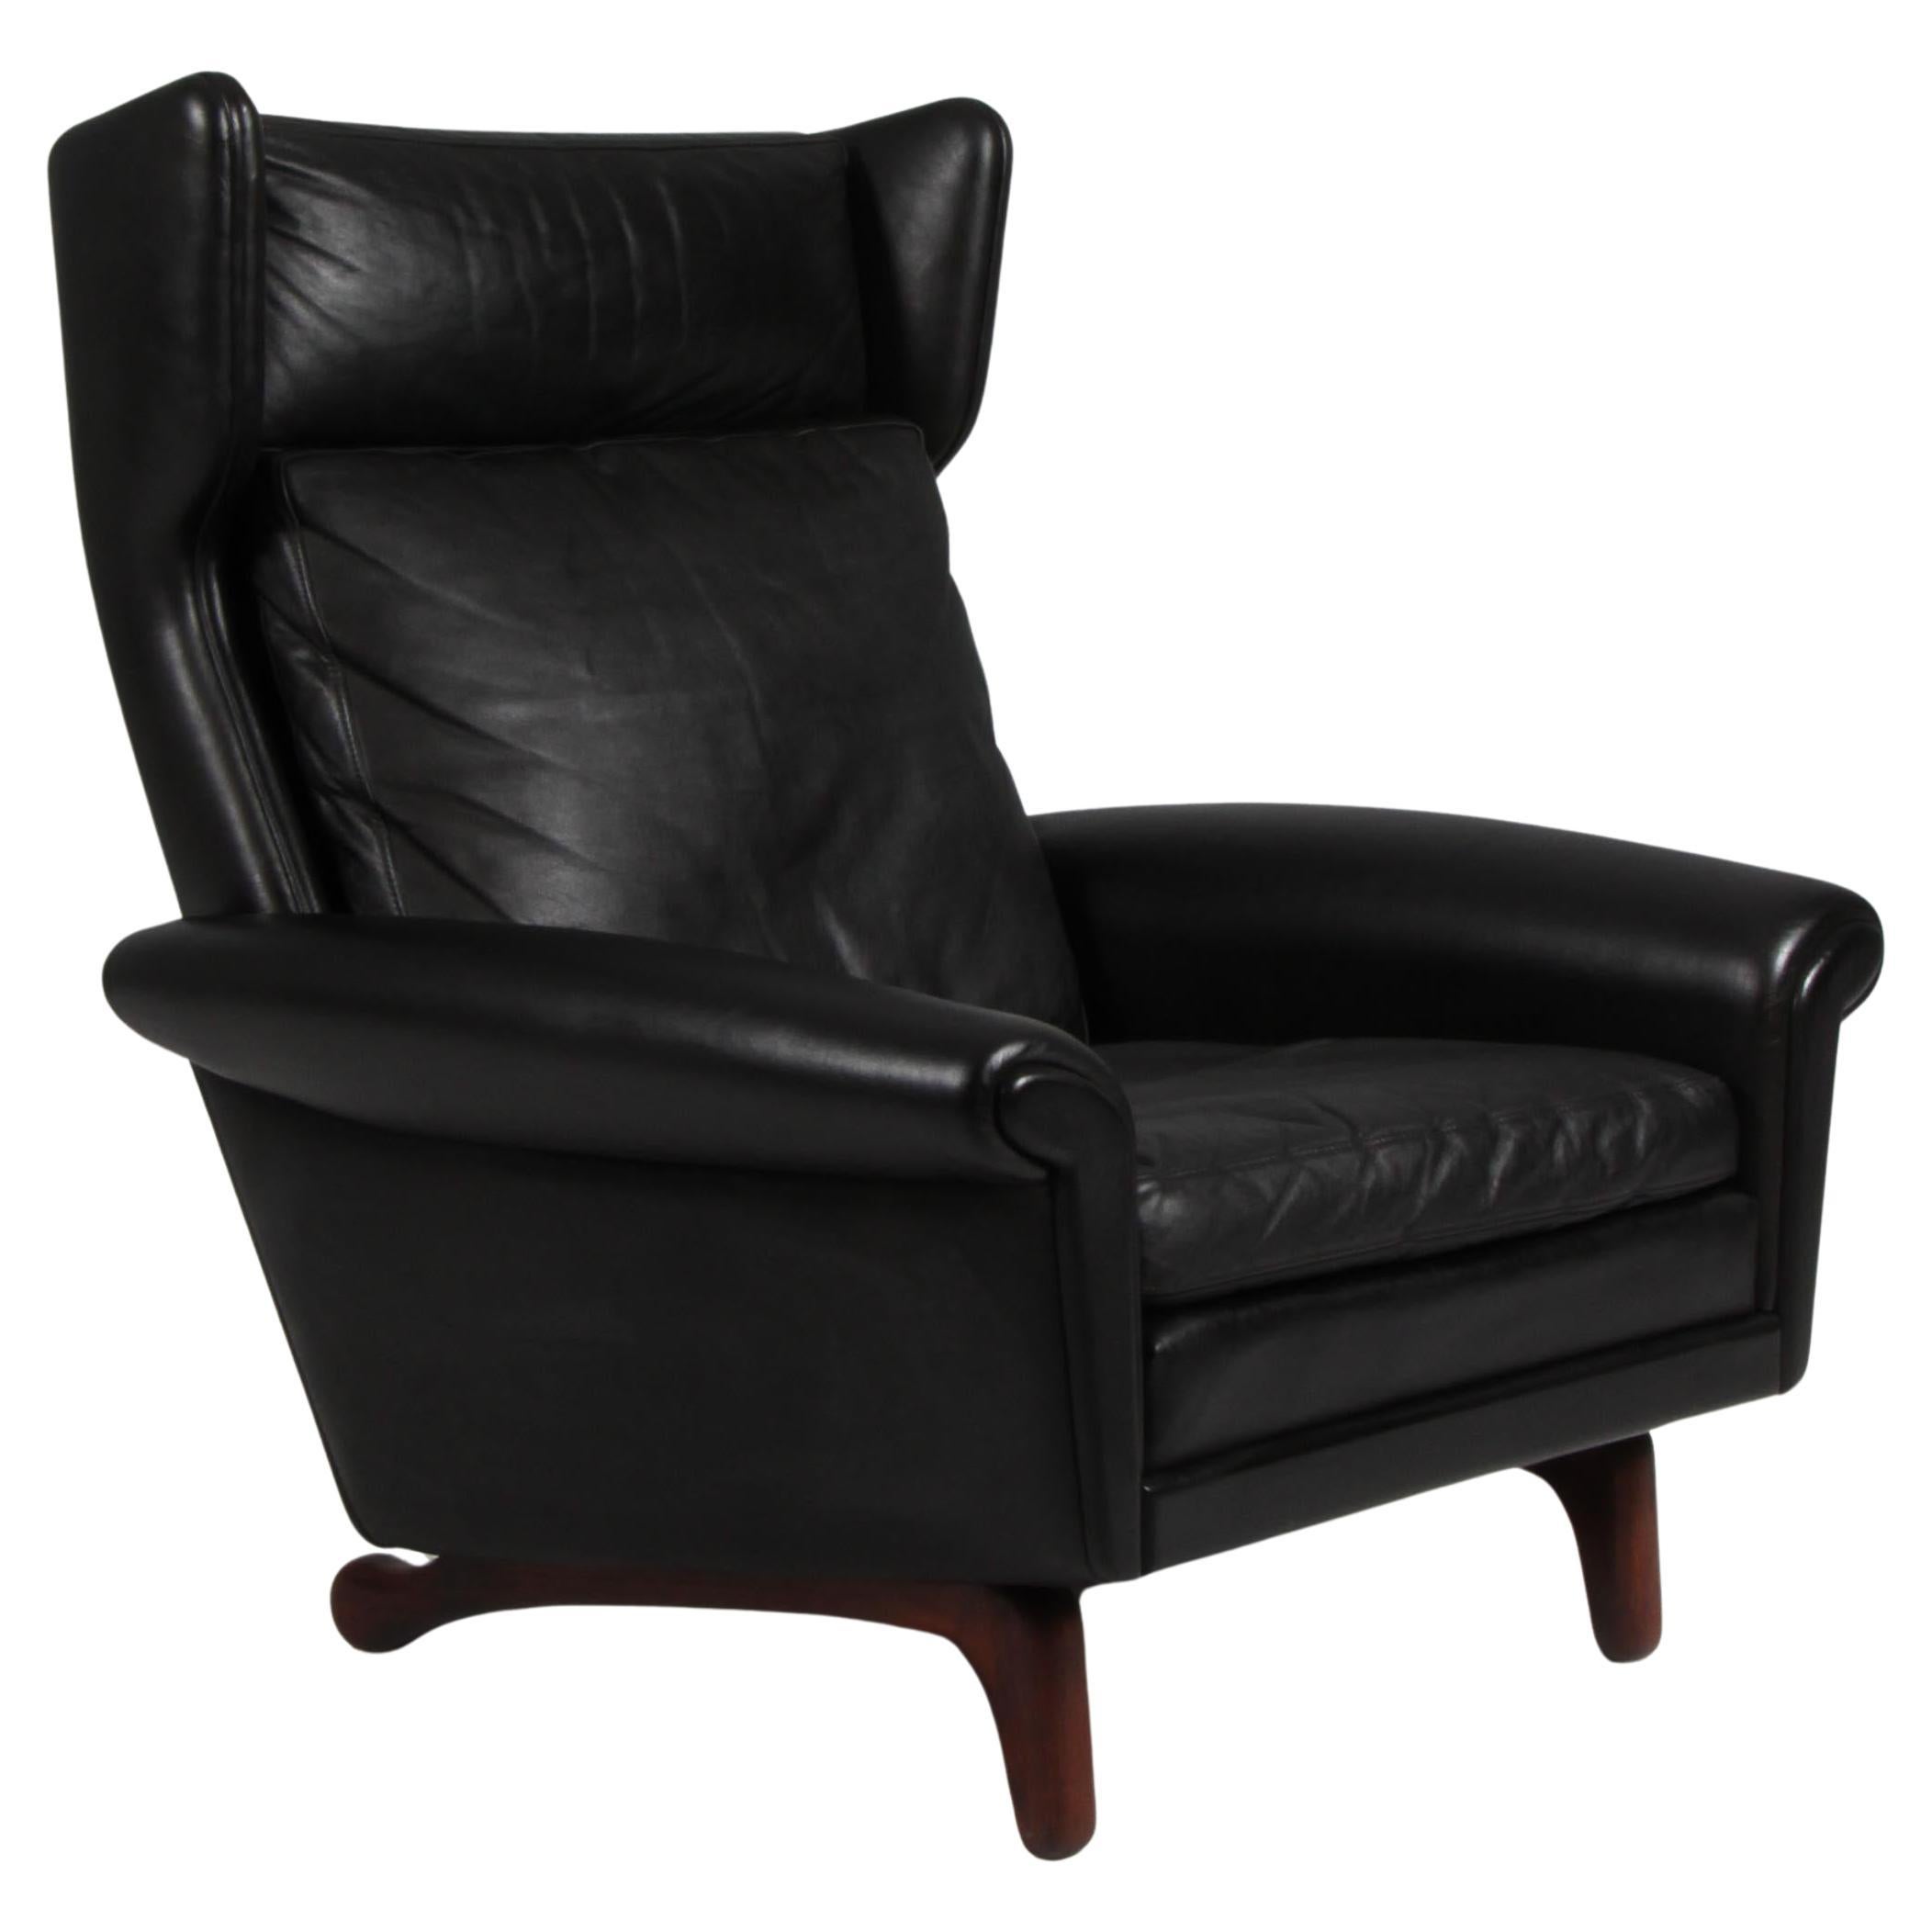 Aage Christiansen for Esra Møbeler. Lounge chair in original black leather. For Sale